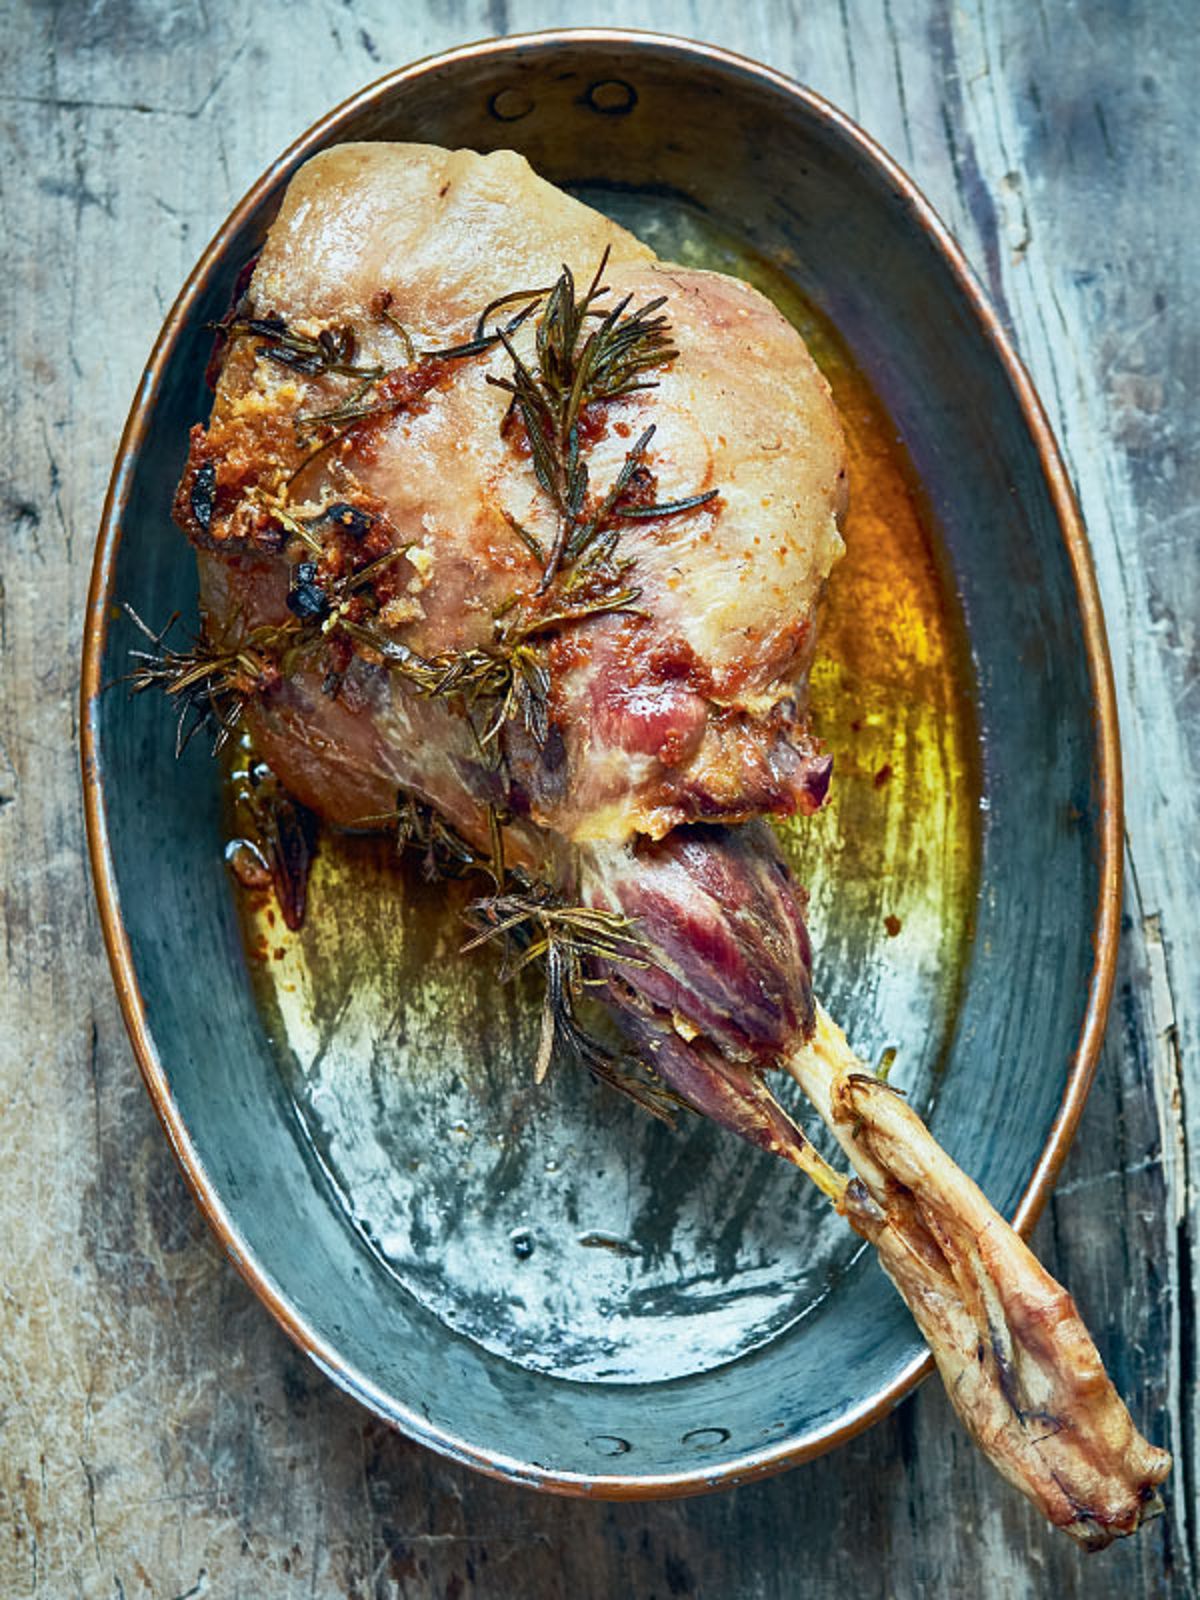 Roast Leg of Lamb with Anchovy and Rosemary